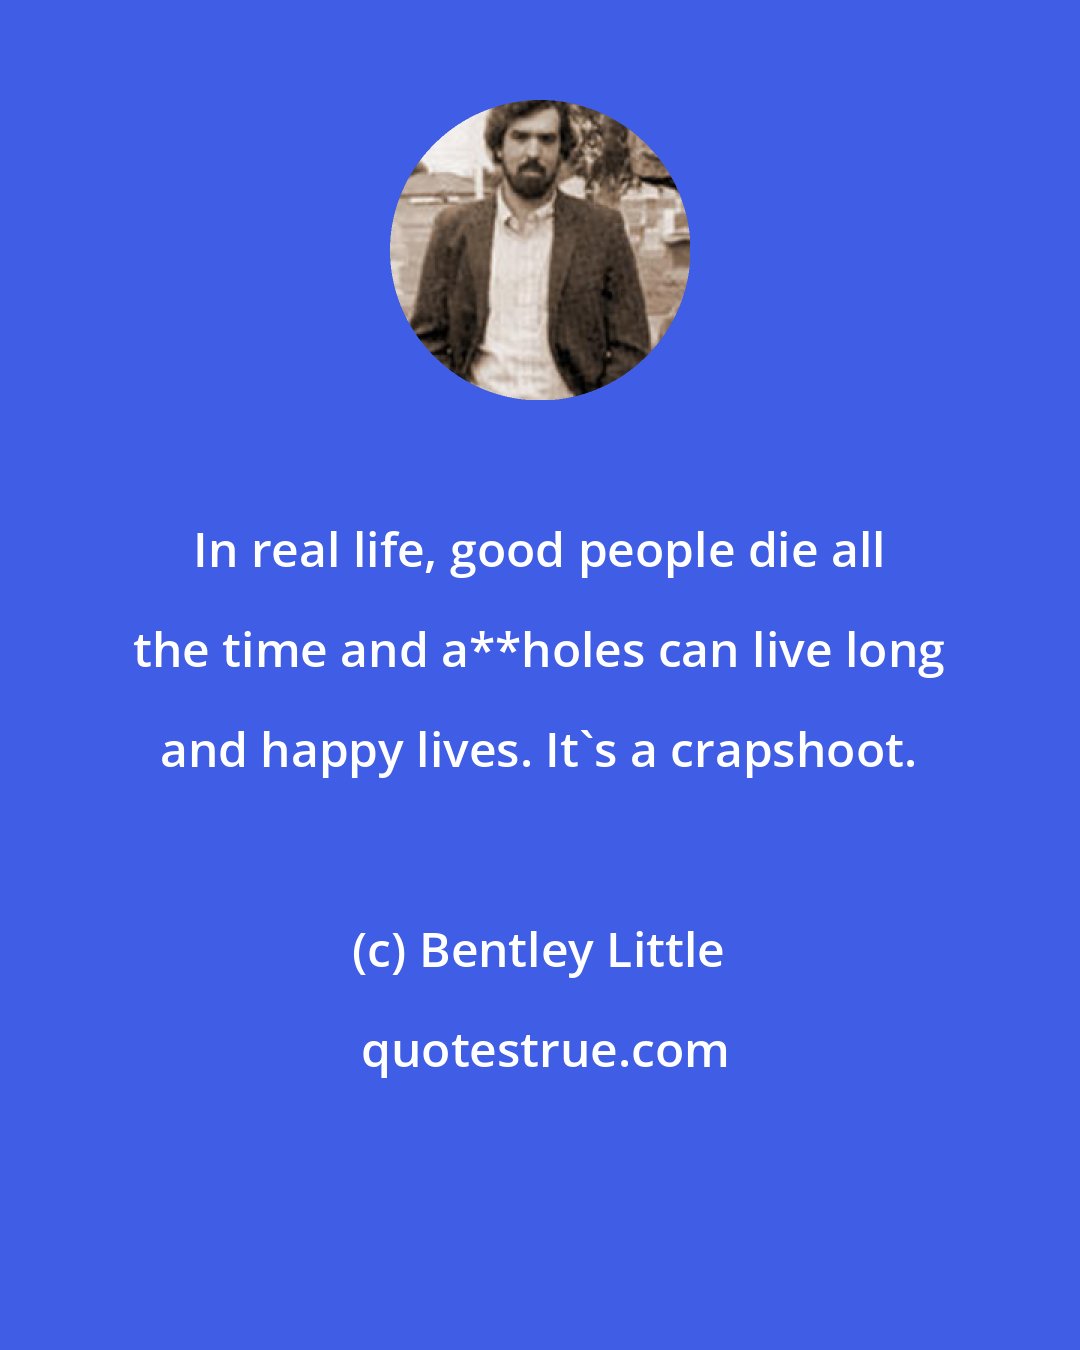 Bentley Little: In real life, good people die all the time and a**holes can live long and happy lives. It's a crapshoot.